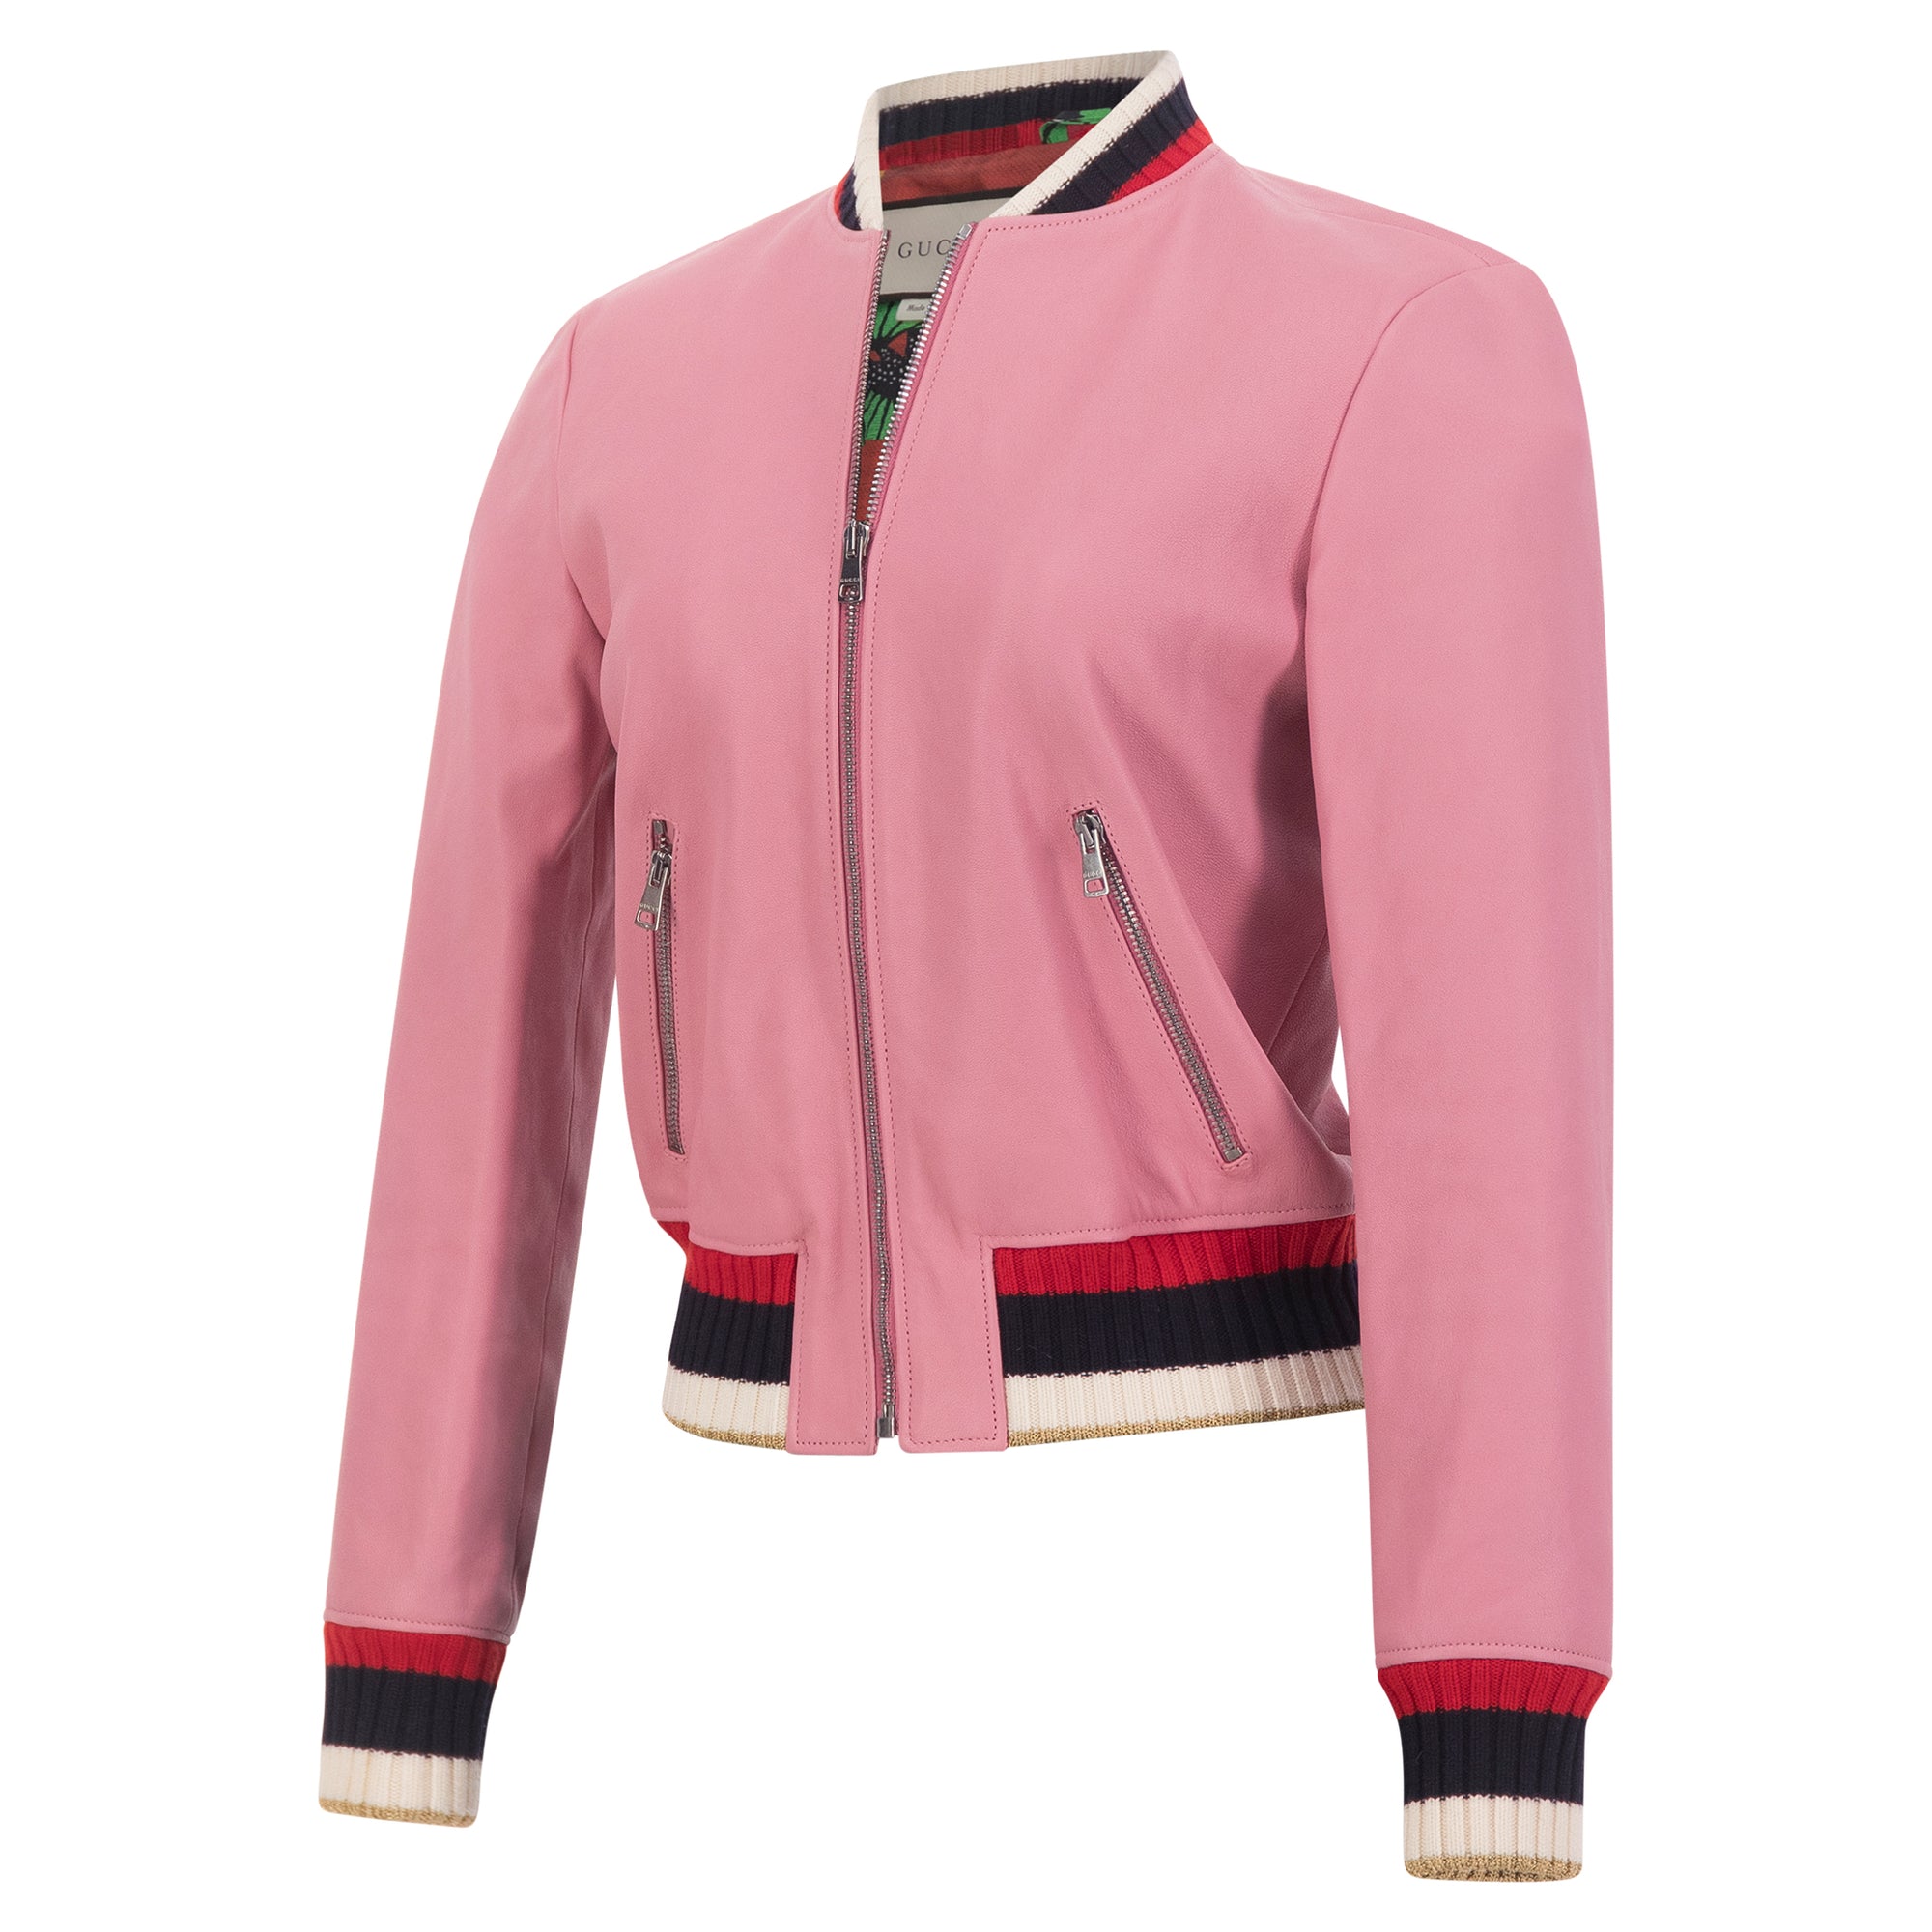 Gucci Blind For Love Bomber Jacket - Dream Closet by Sira Pevida